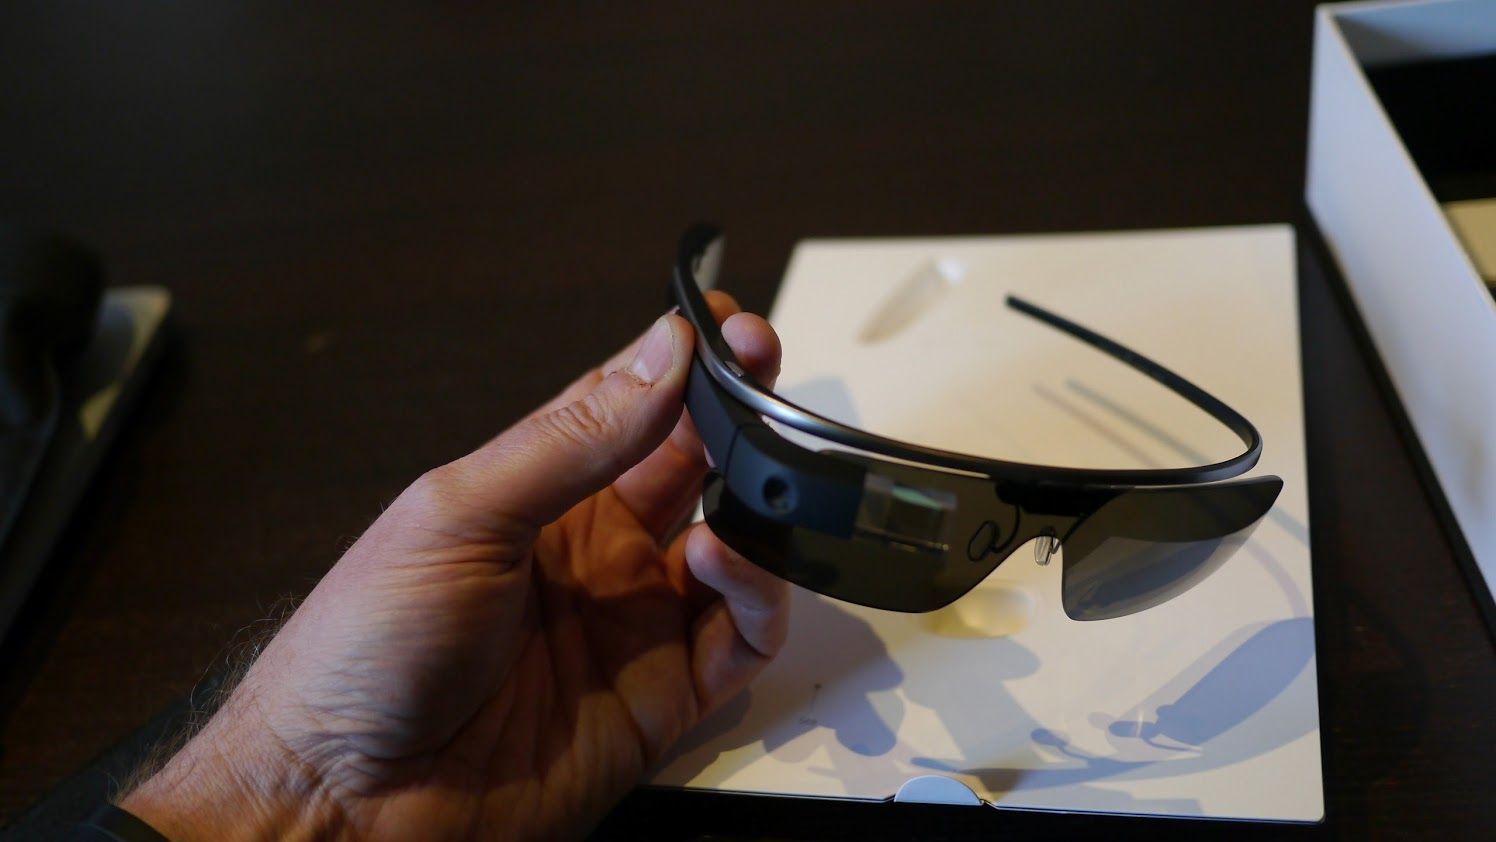 google restricts selling explorer glass units threatens deactivation image 1